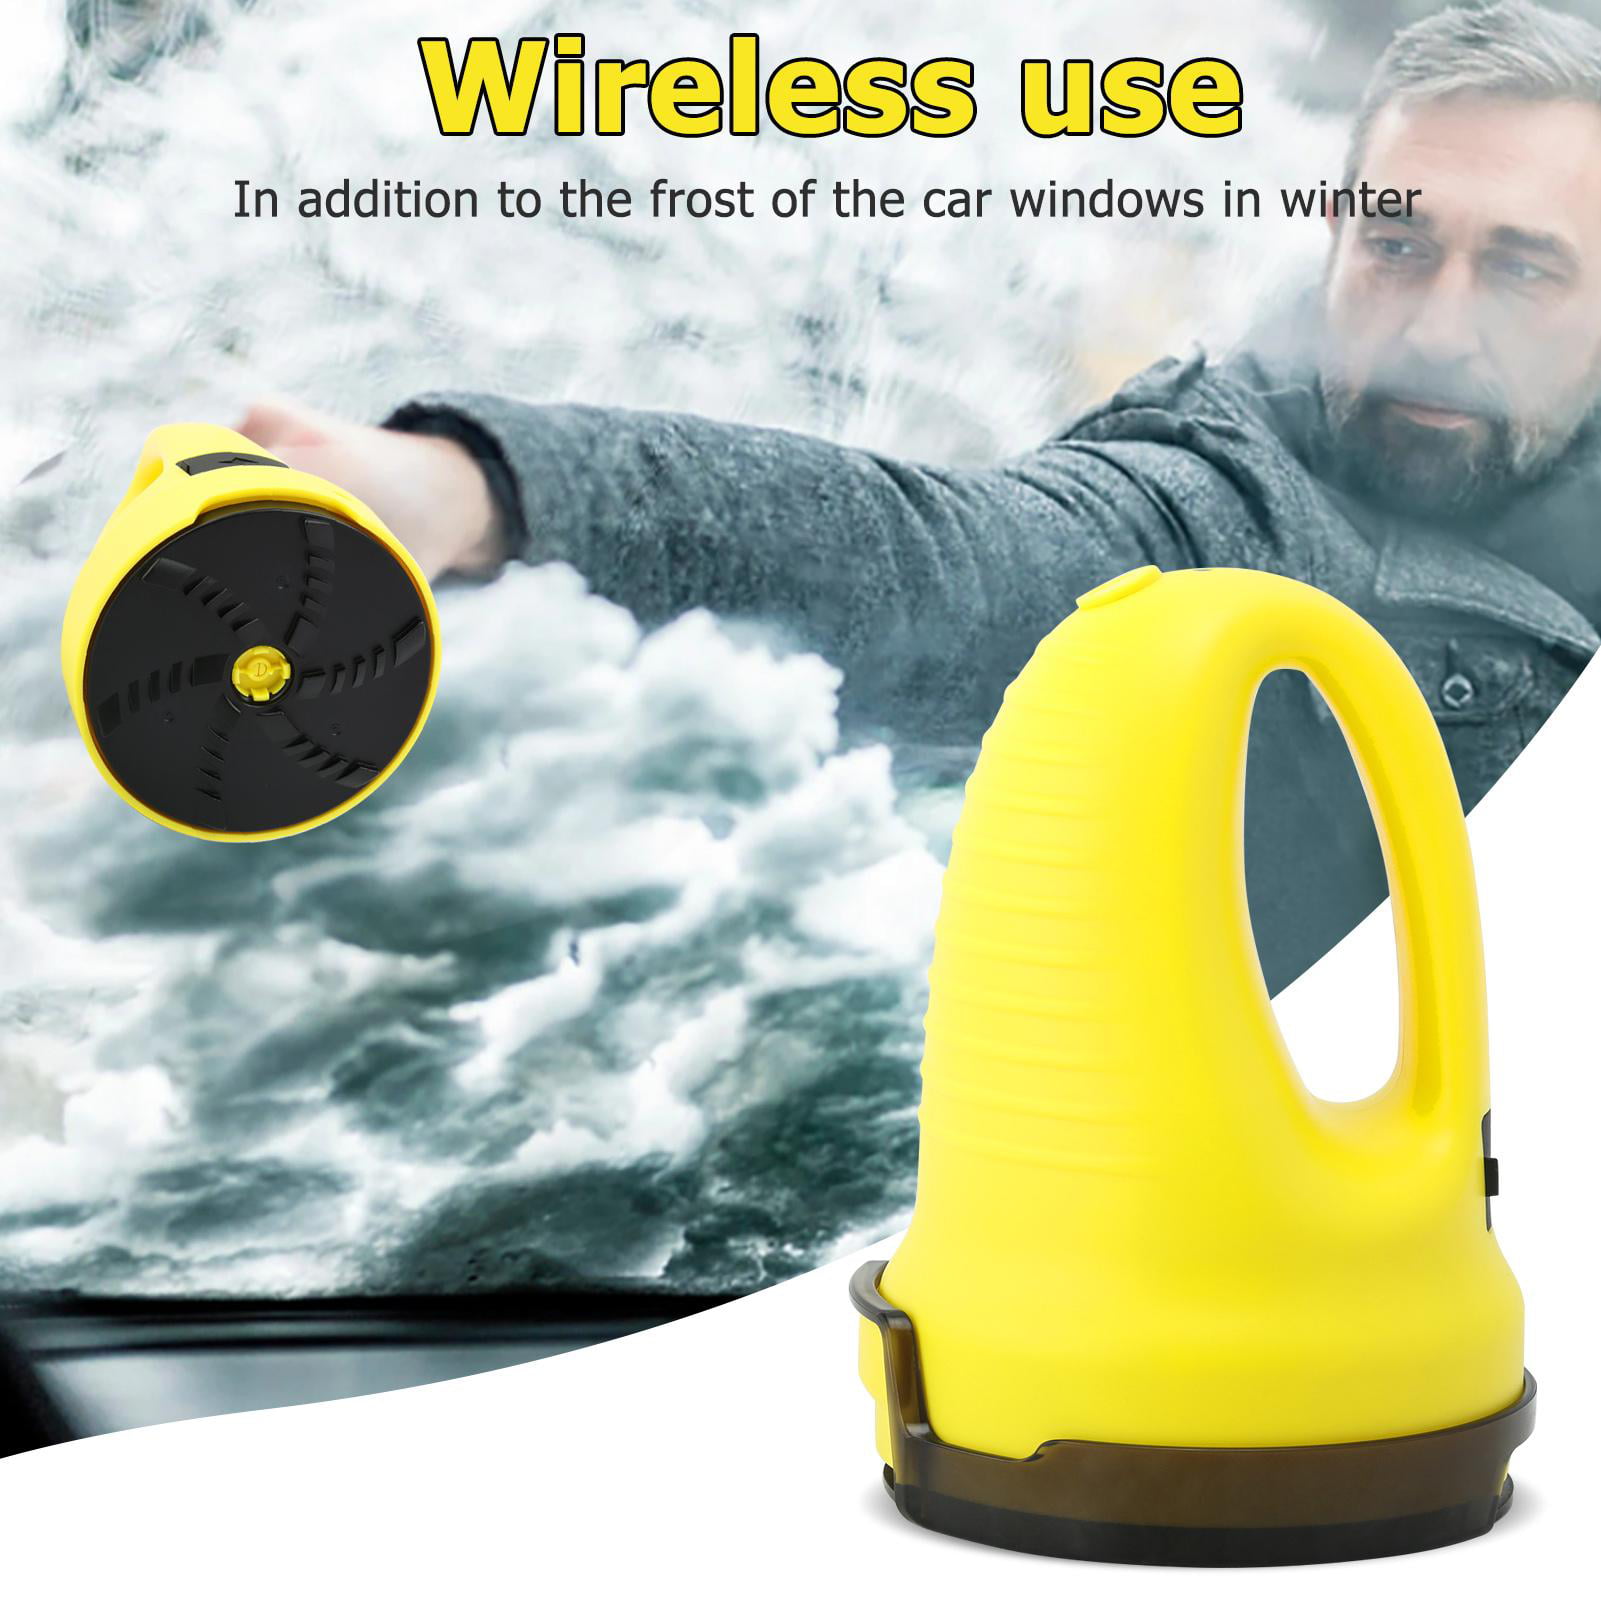 New Snow Remover Car Windshield Anti-icing Defrosting Device Car Snow C